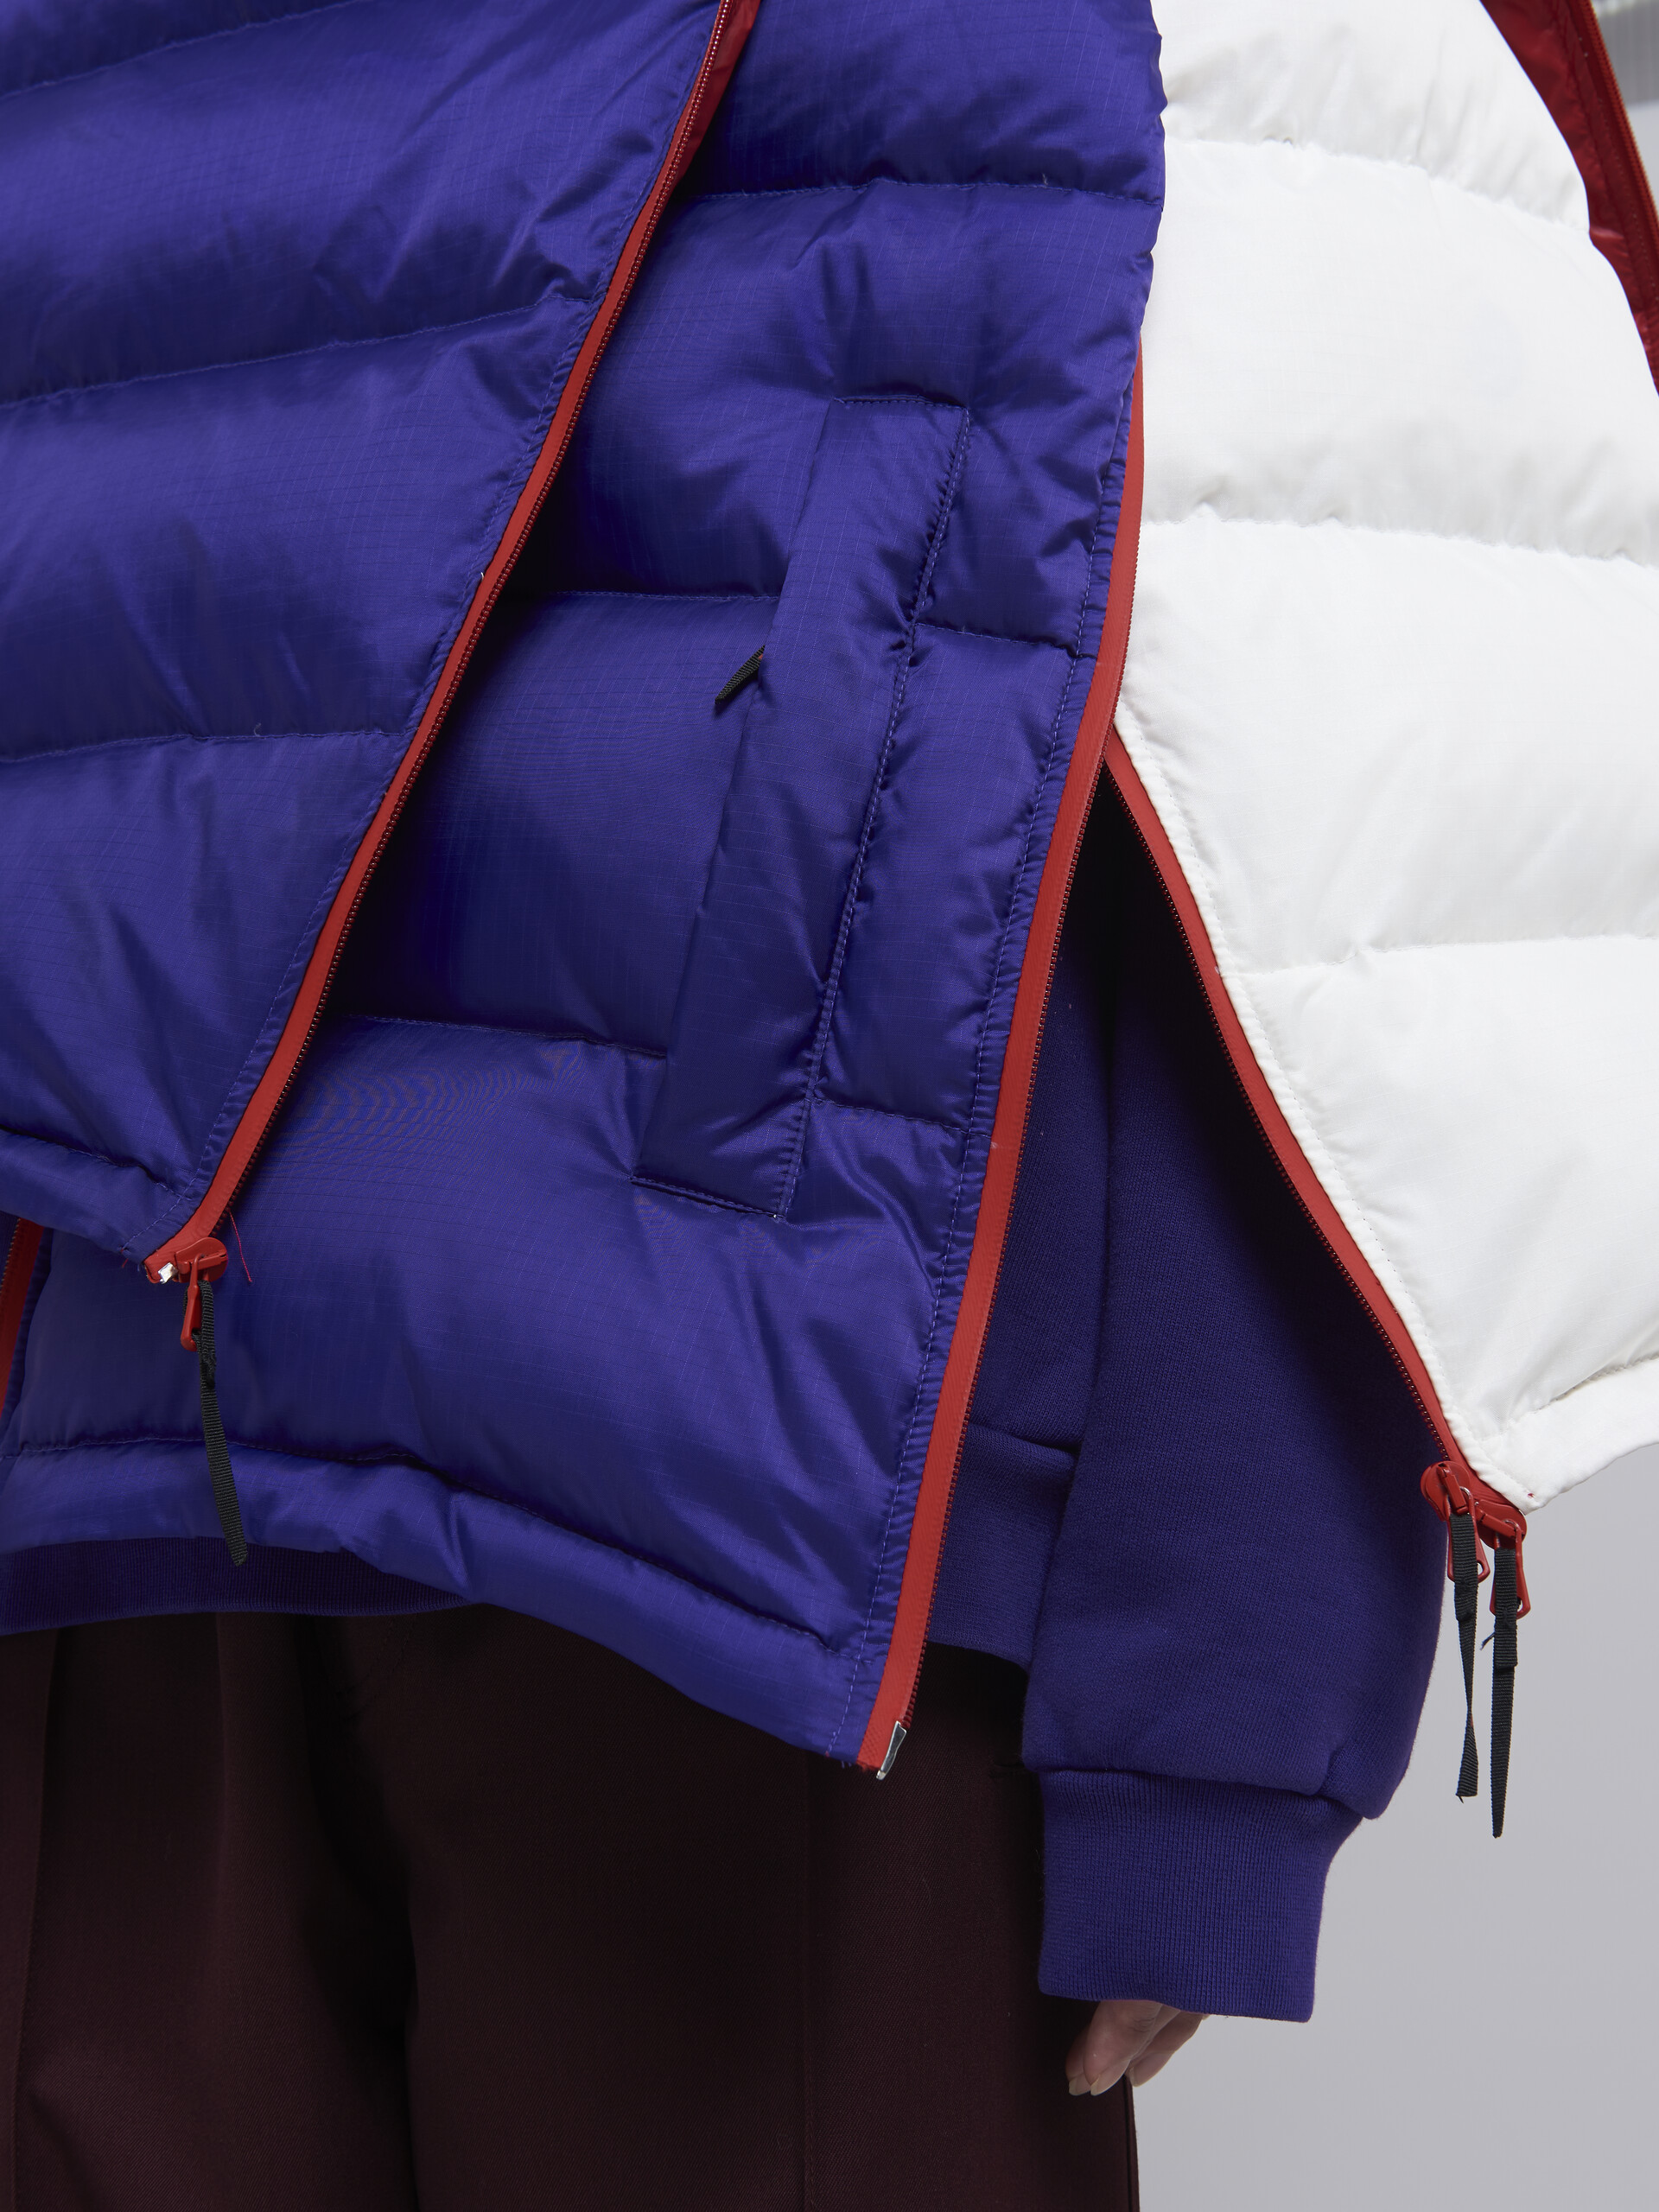 Down jacket in colour-block ripstop nylon - Winter jackets - Image 5